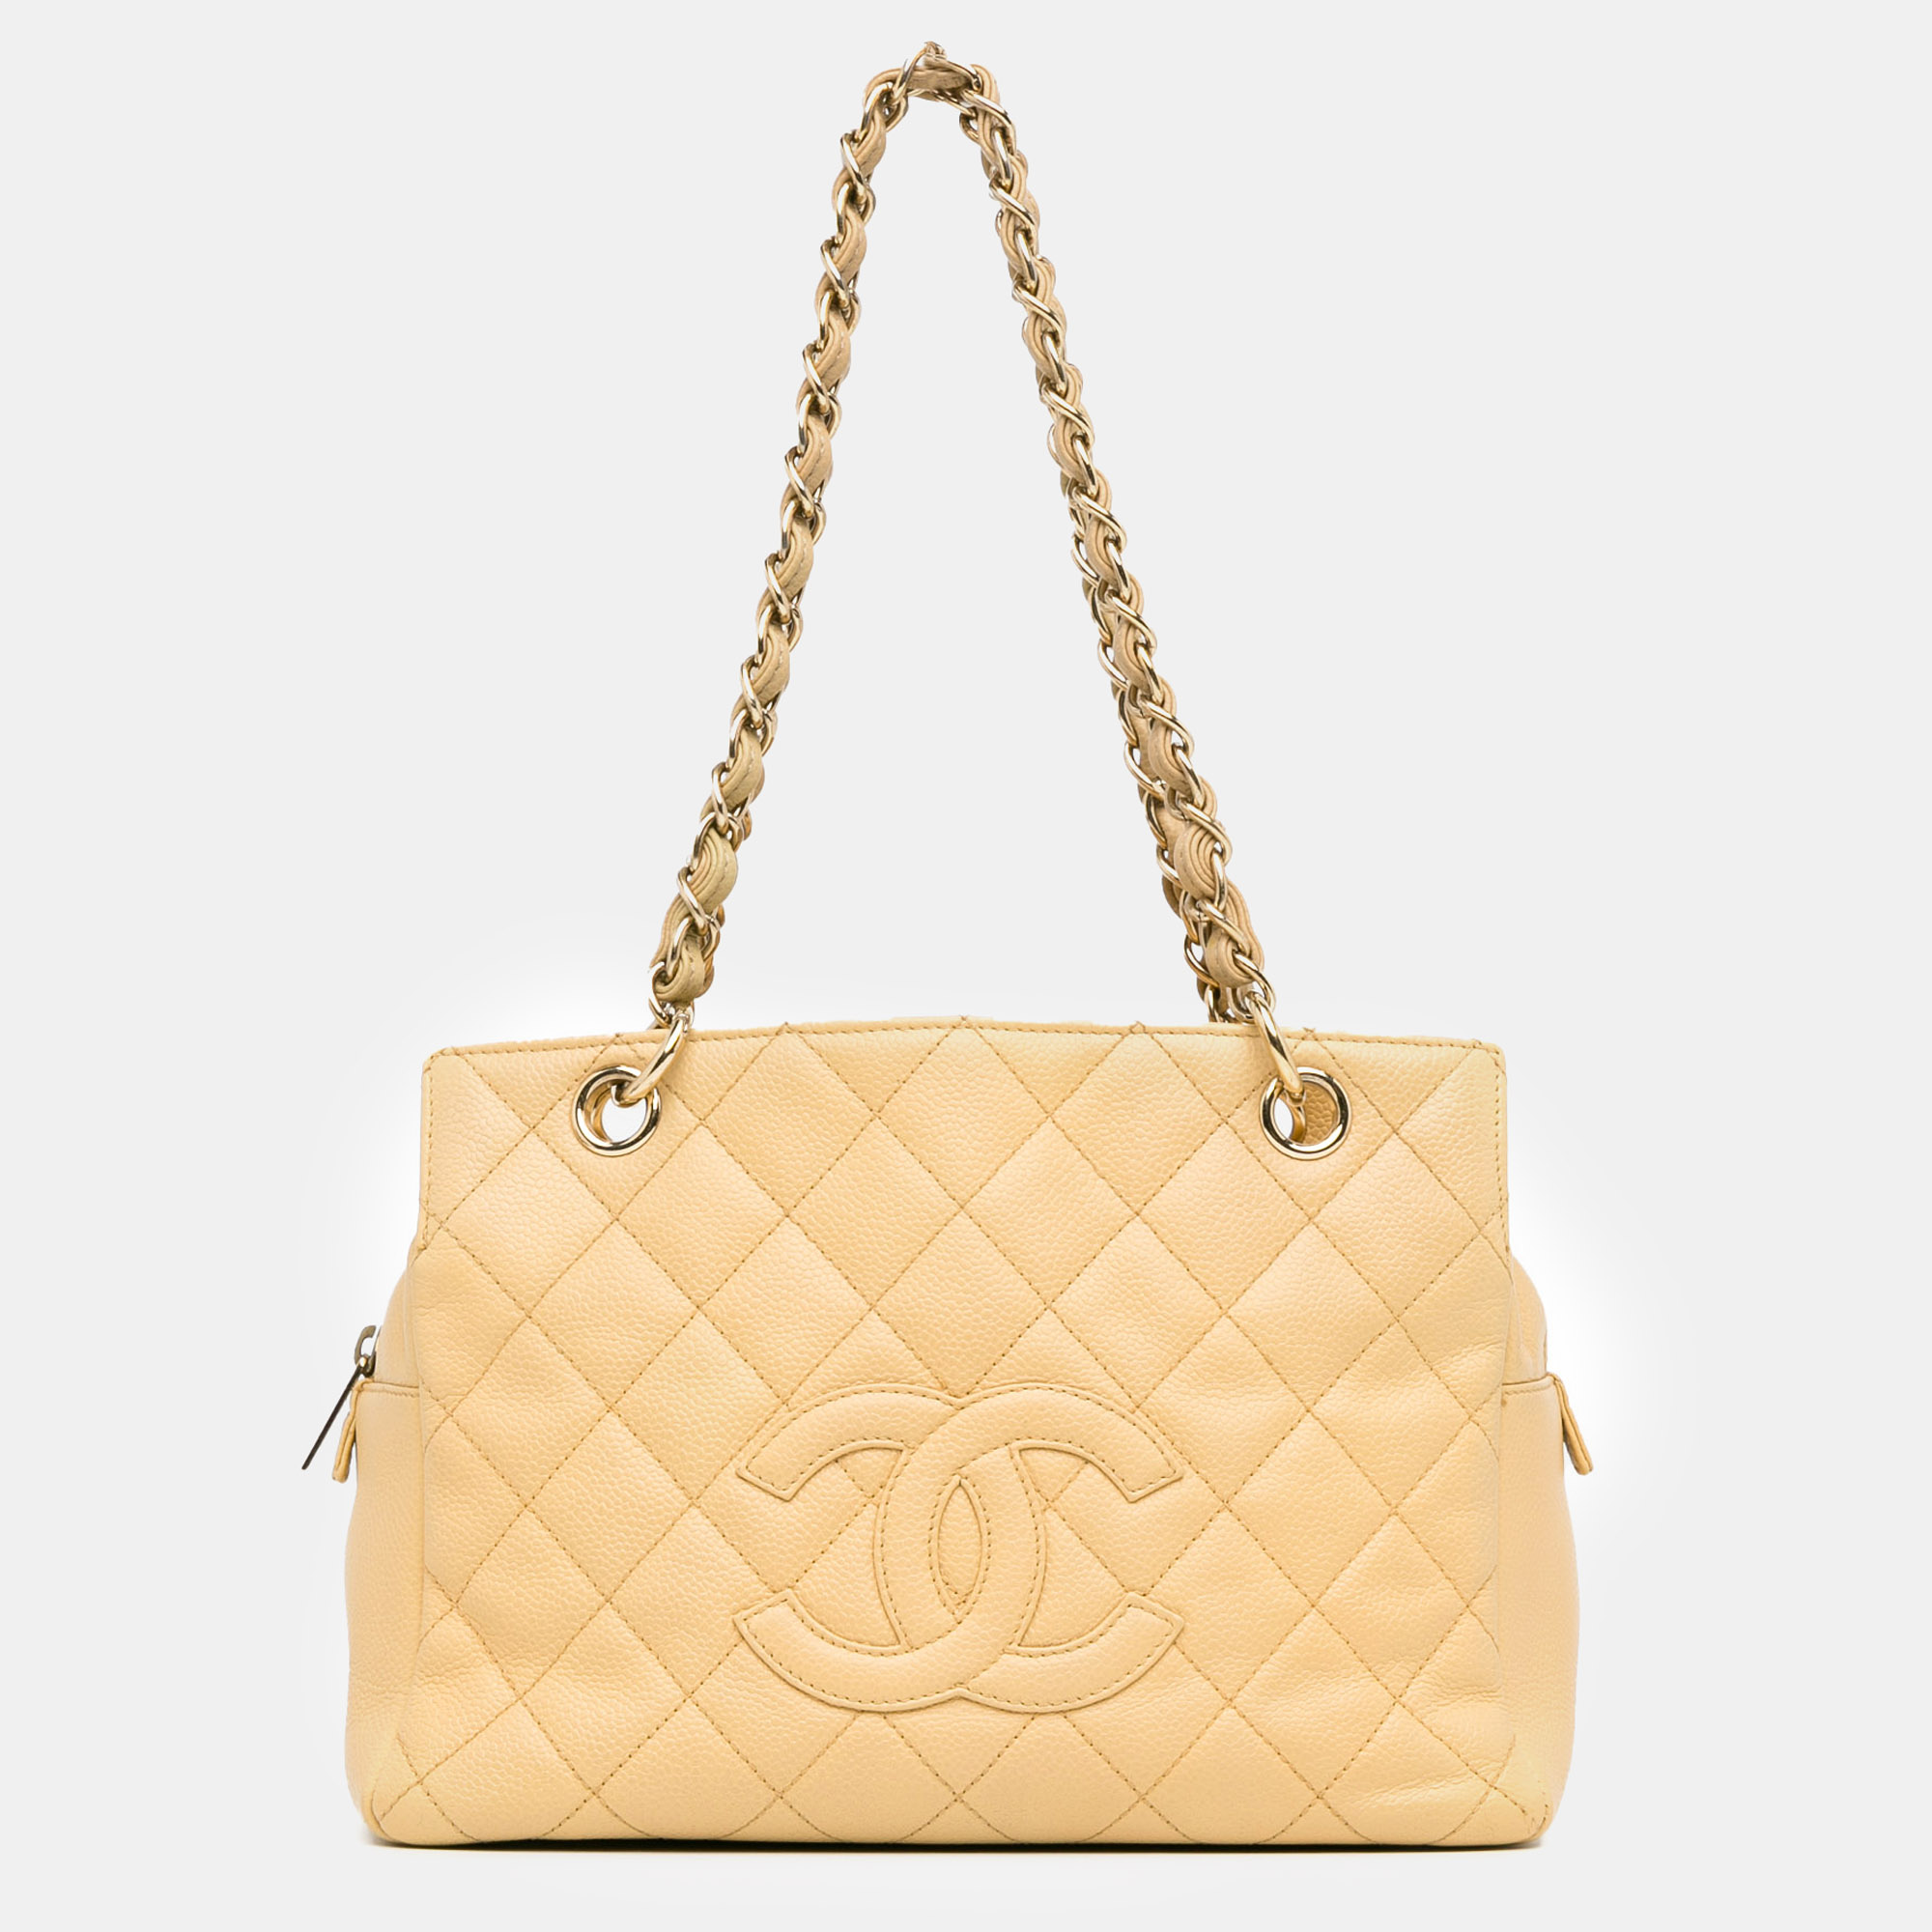 Chanel petite caviar timeless shopping tote